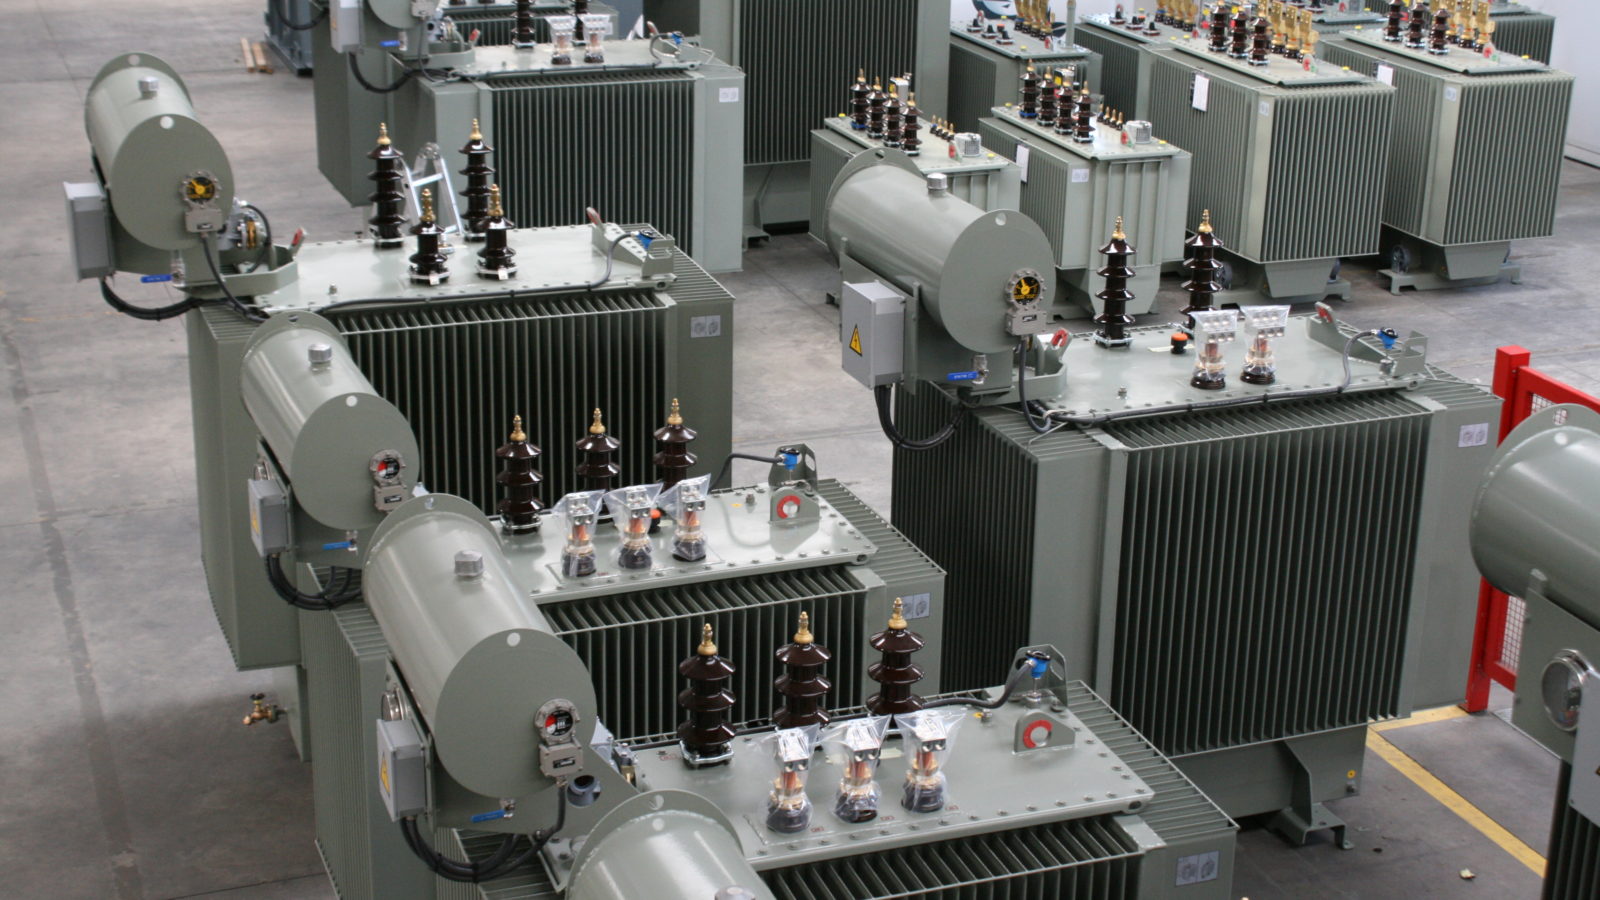 Single-phase transformers with conservator